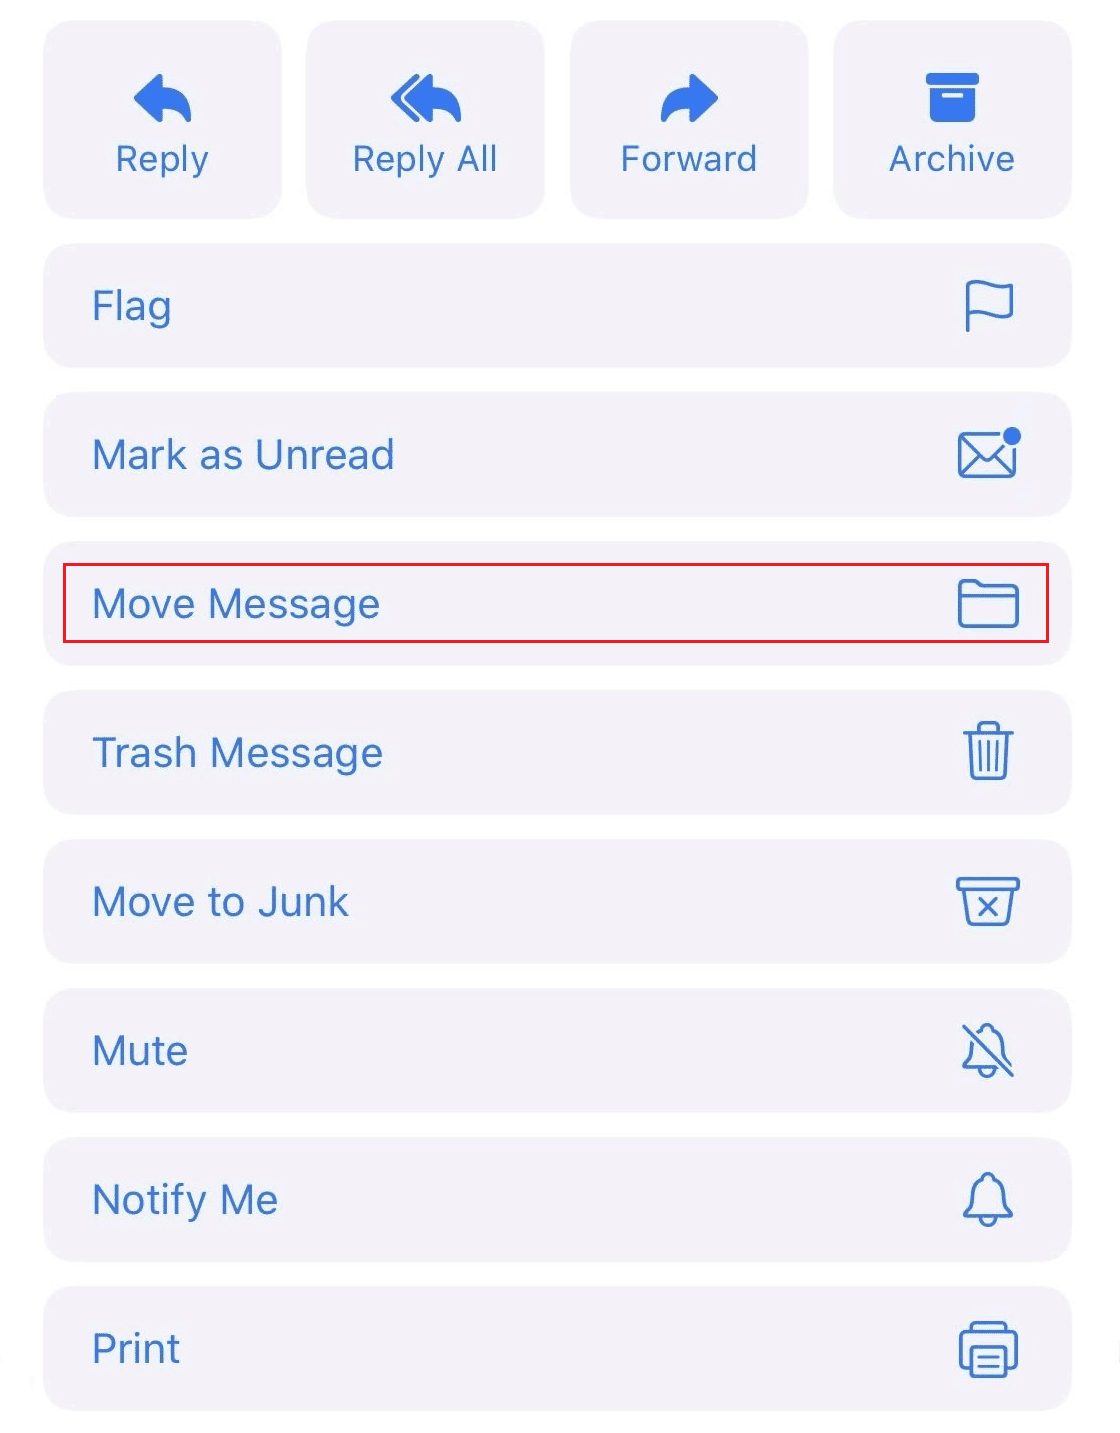 Tap on More - Move Message